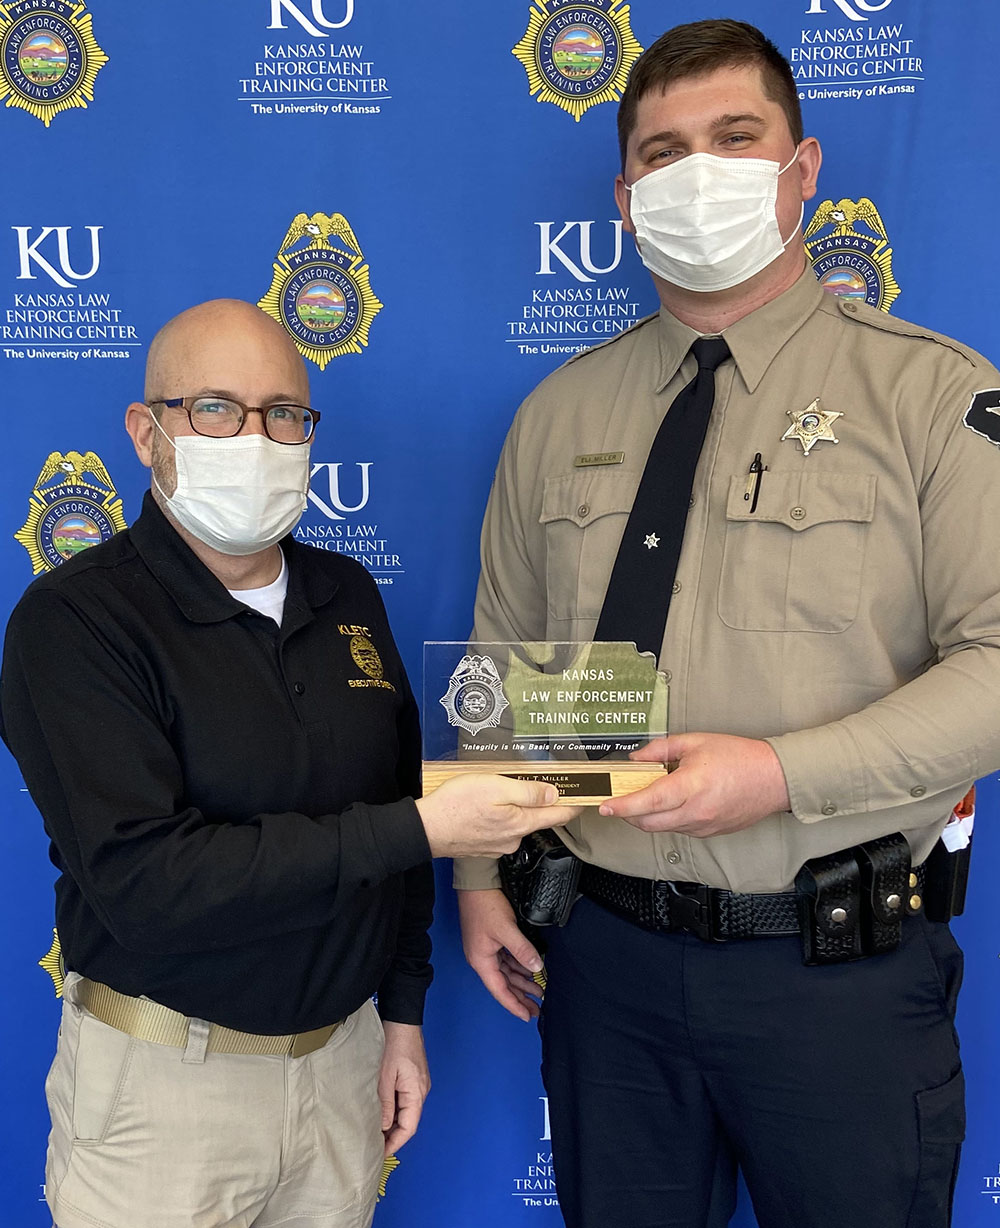 KLETC Executive Director Darin Beck presents Deputy Eli Miller of the Pottawatomie County Sheriff’s Office, the graduation class president, with his plaque.